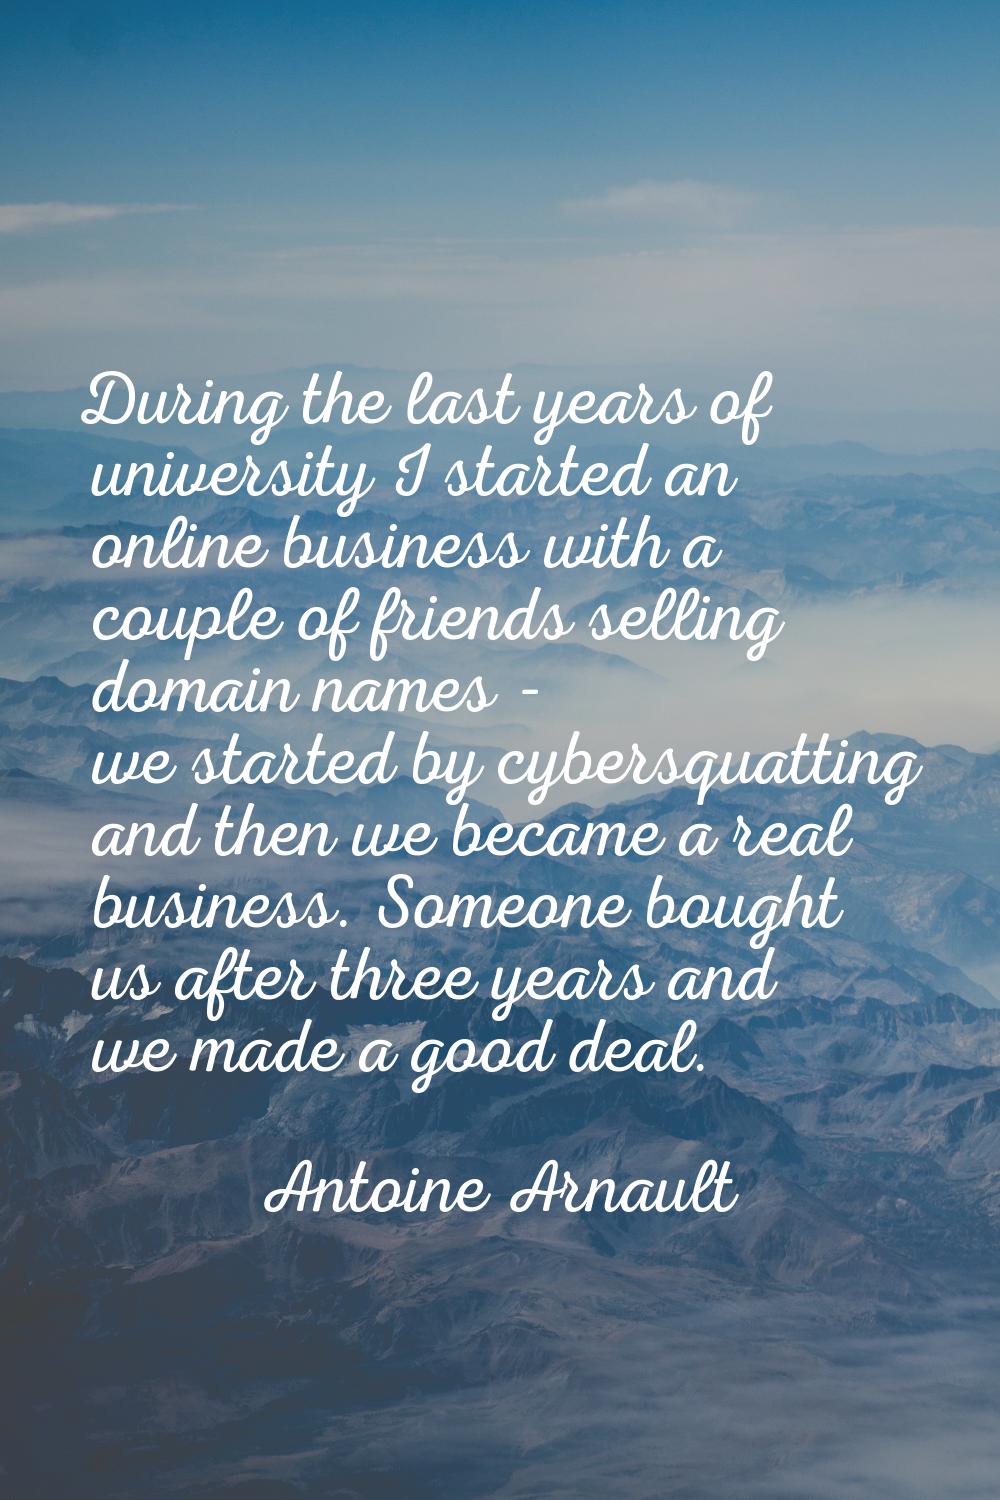 During the last years of university I started an online business with a couple of friends selling d